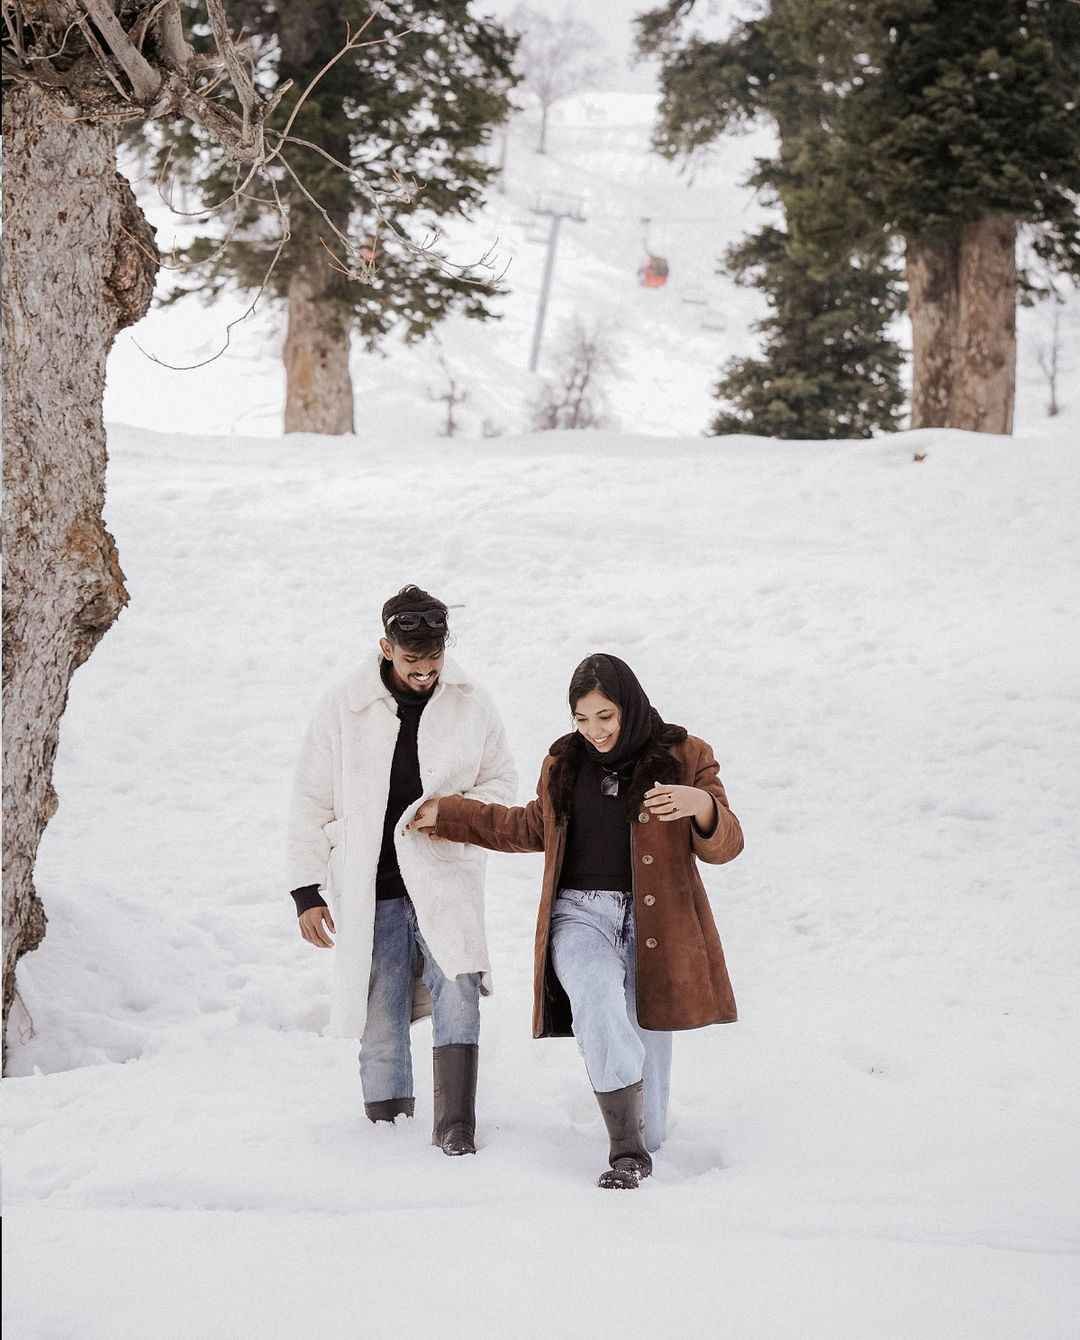 Best Places To Visit In Gulmarg in Hindi, Top Tourist Places in Gulmarg In Hindi, Gulmarg Tourism In Hindi, Best Tourist Places of Gulmarg In Hindi, Best Destination of Gulmarg, Gulmarg Best Destination For Honeymoon In Hindi, Beautiful Places of Gulmarg tourism In Hindi